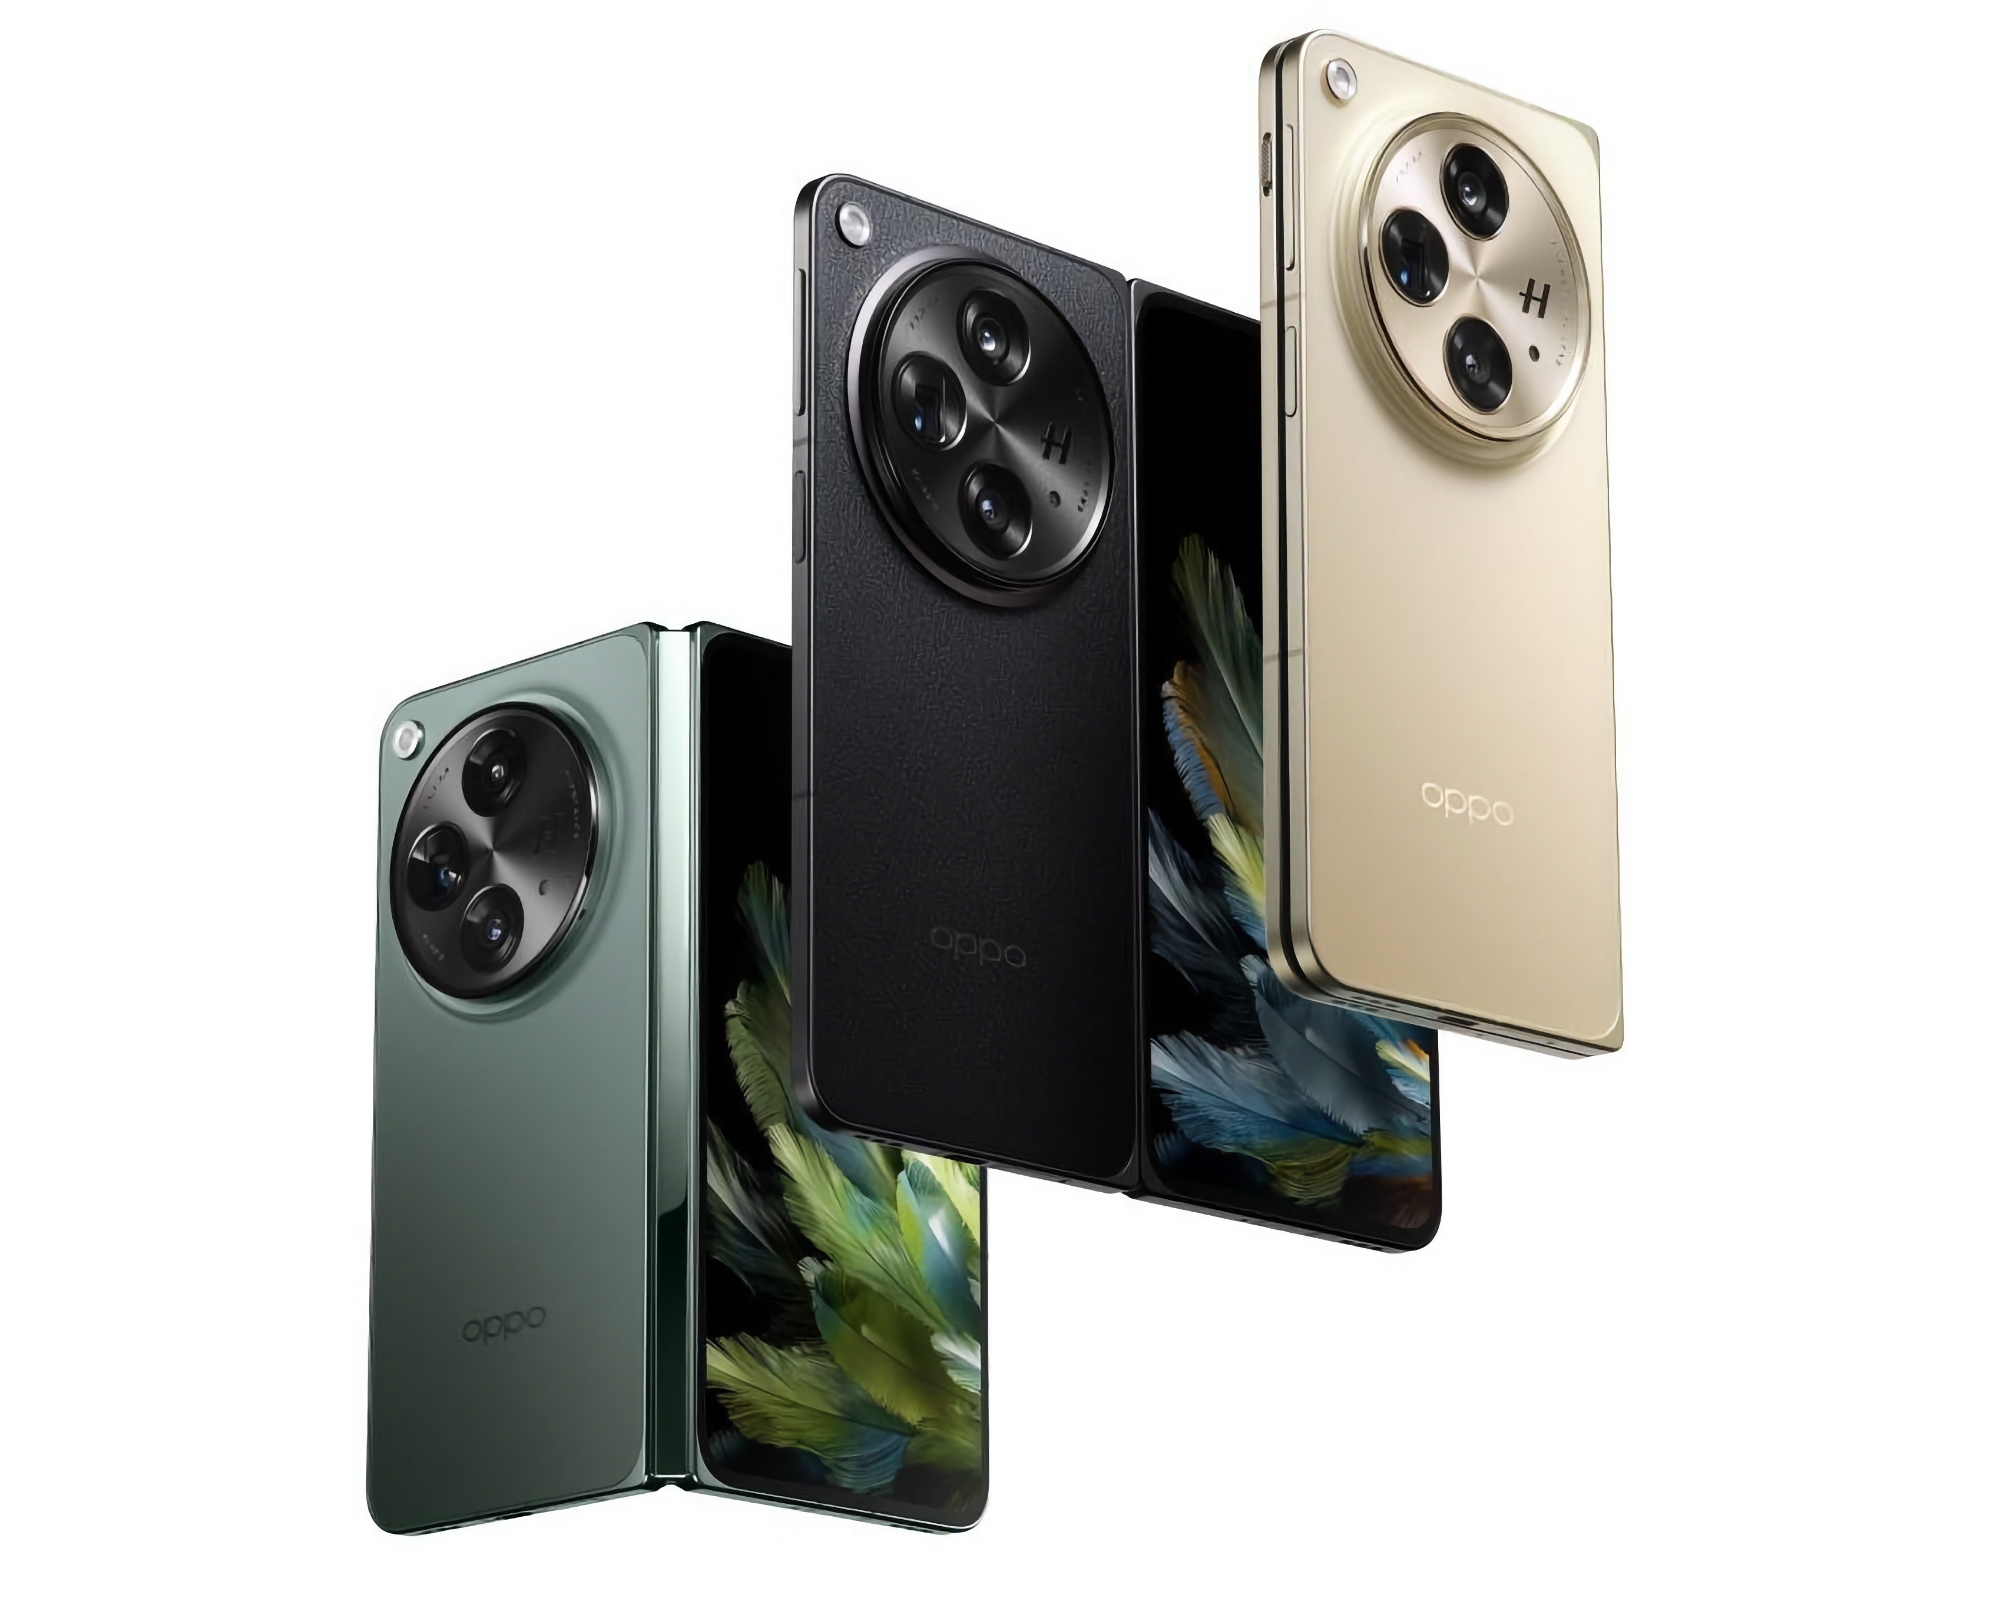 Samsung Galaxy Fold 5 rival: OPPO unveiled the Find N3 with dual displays, Snapdragon 8 Gen 2 chip and Hasselblad camera